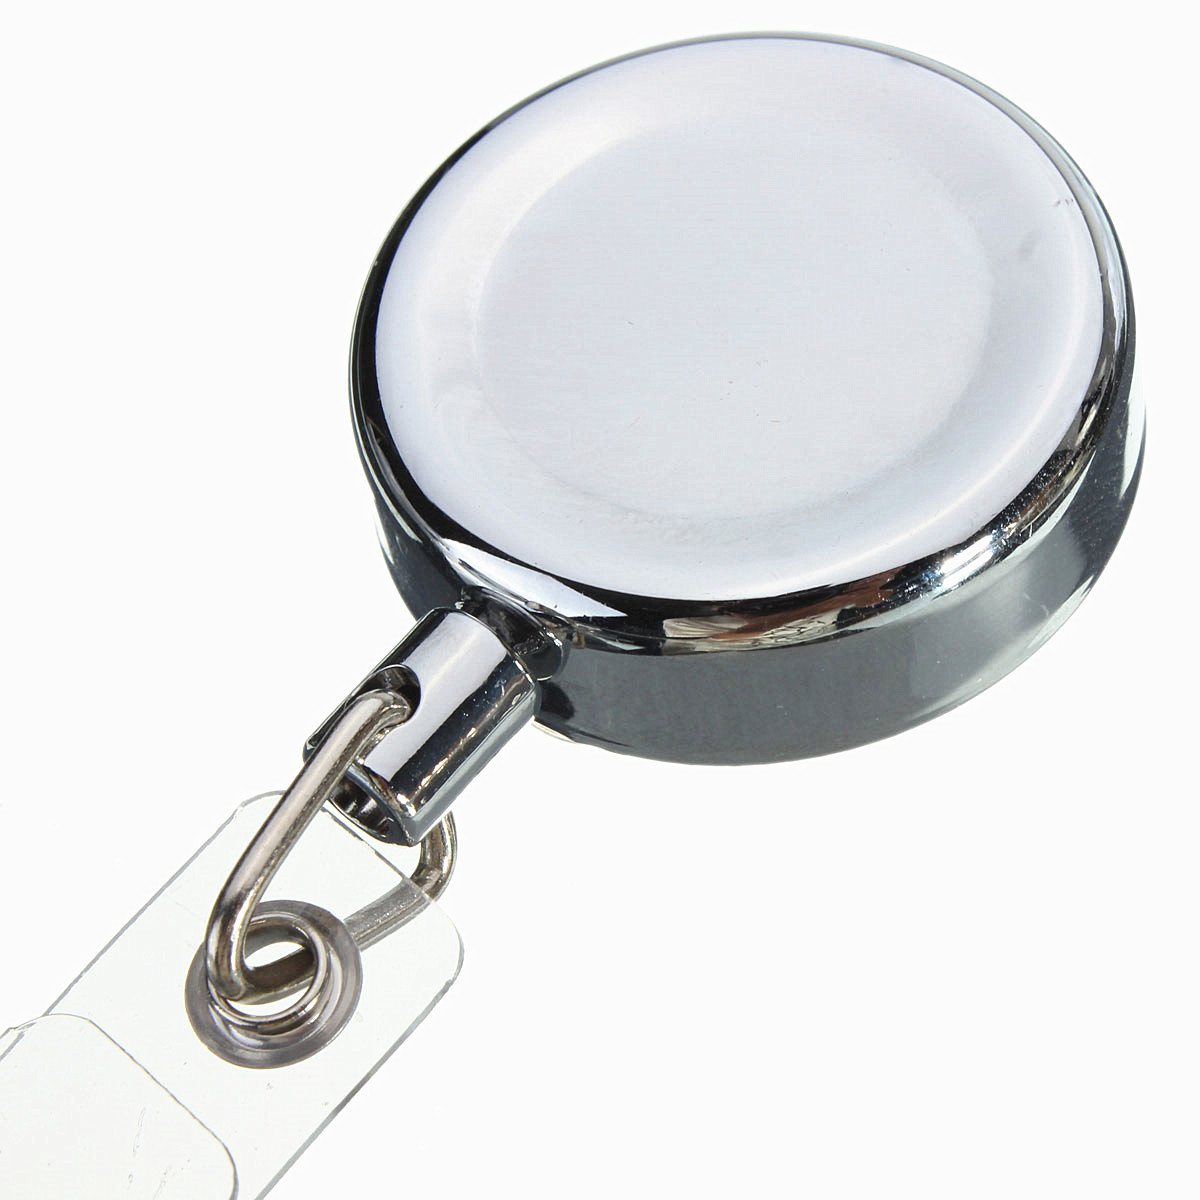 30mm-Metal-Retractable-Pull-Chain-Reel-ID-Card-Badge-Holder-Recoil-Belt-Key-Clip-1374104